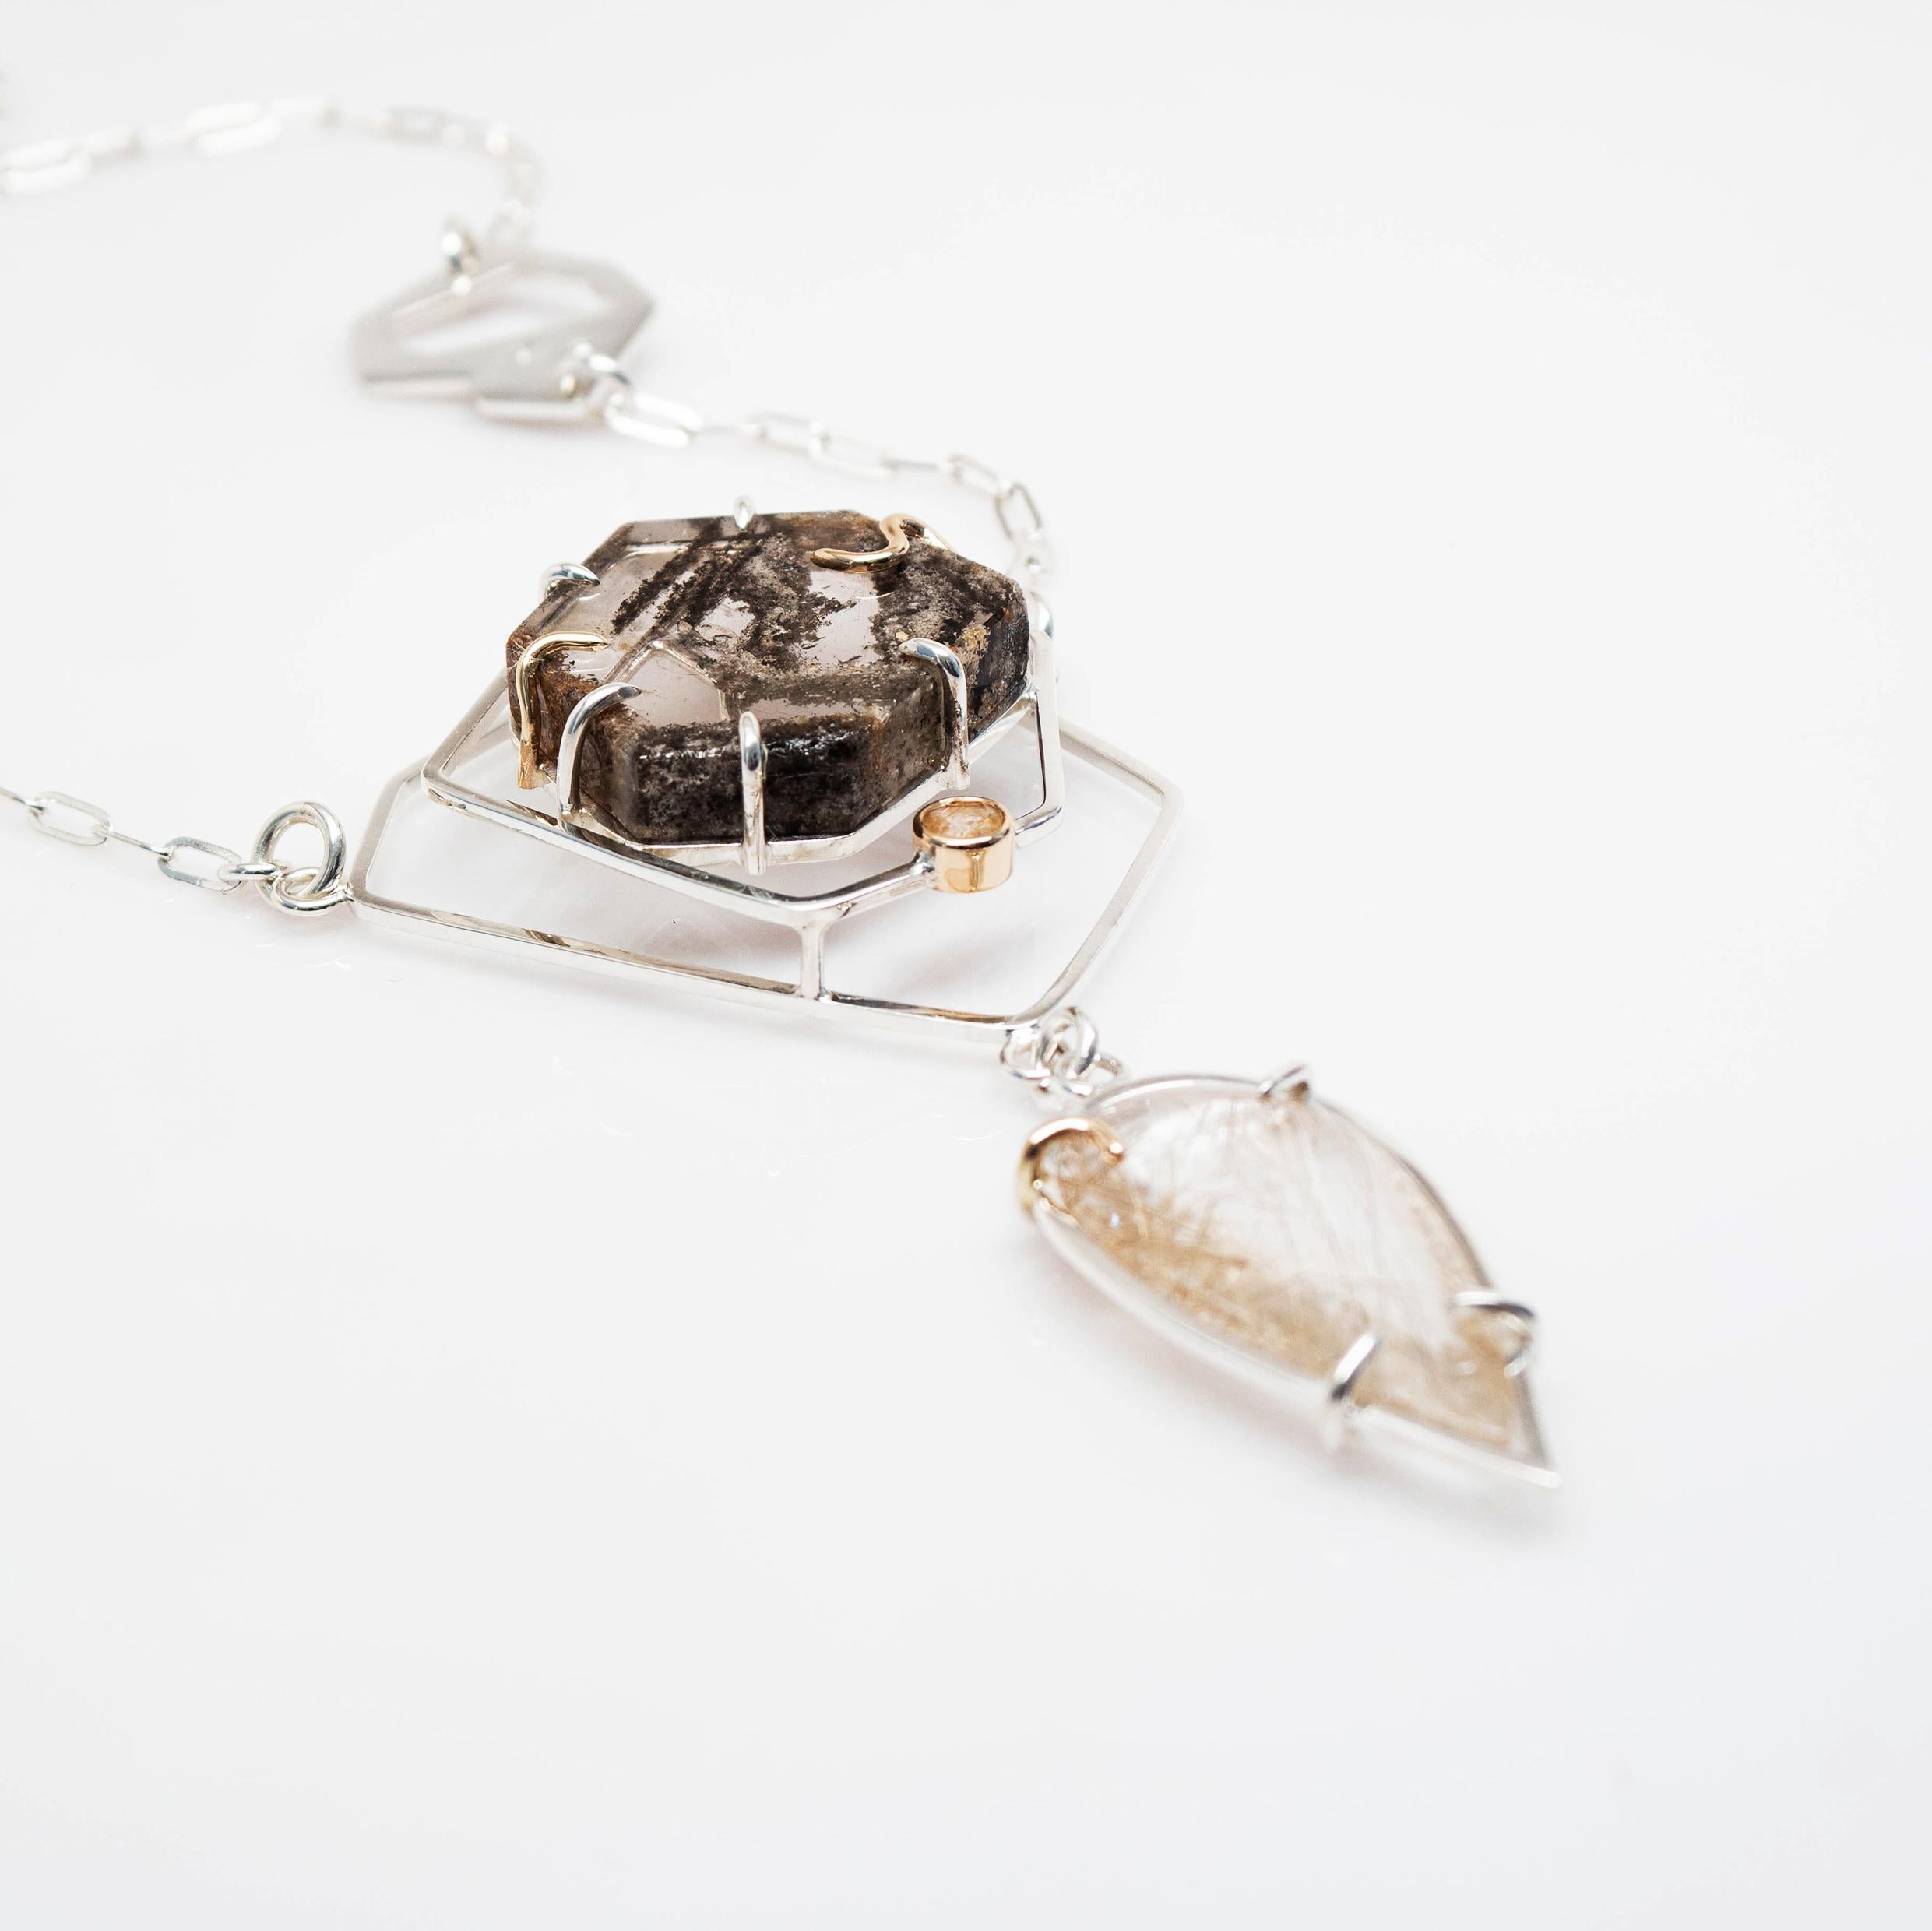 The Fragmentation Necklace was designed with crystal healing and balance in mind. The visual elements of this three-dimensional statement piece is a reflection of the beautiful complexities of what it means to be a spiritual being having a human